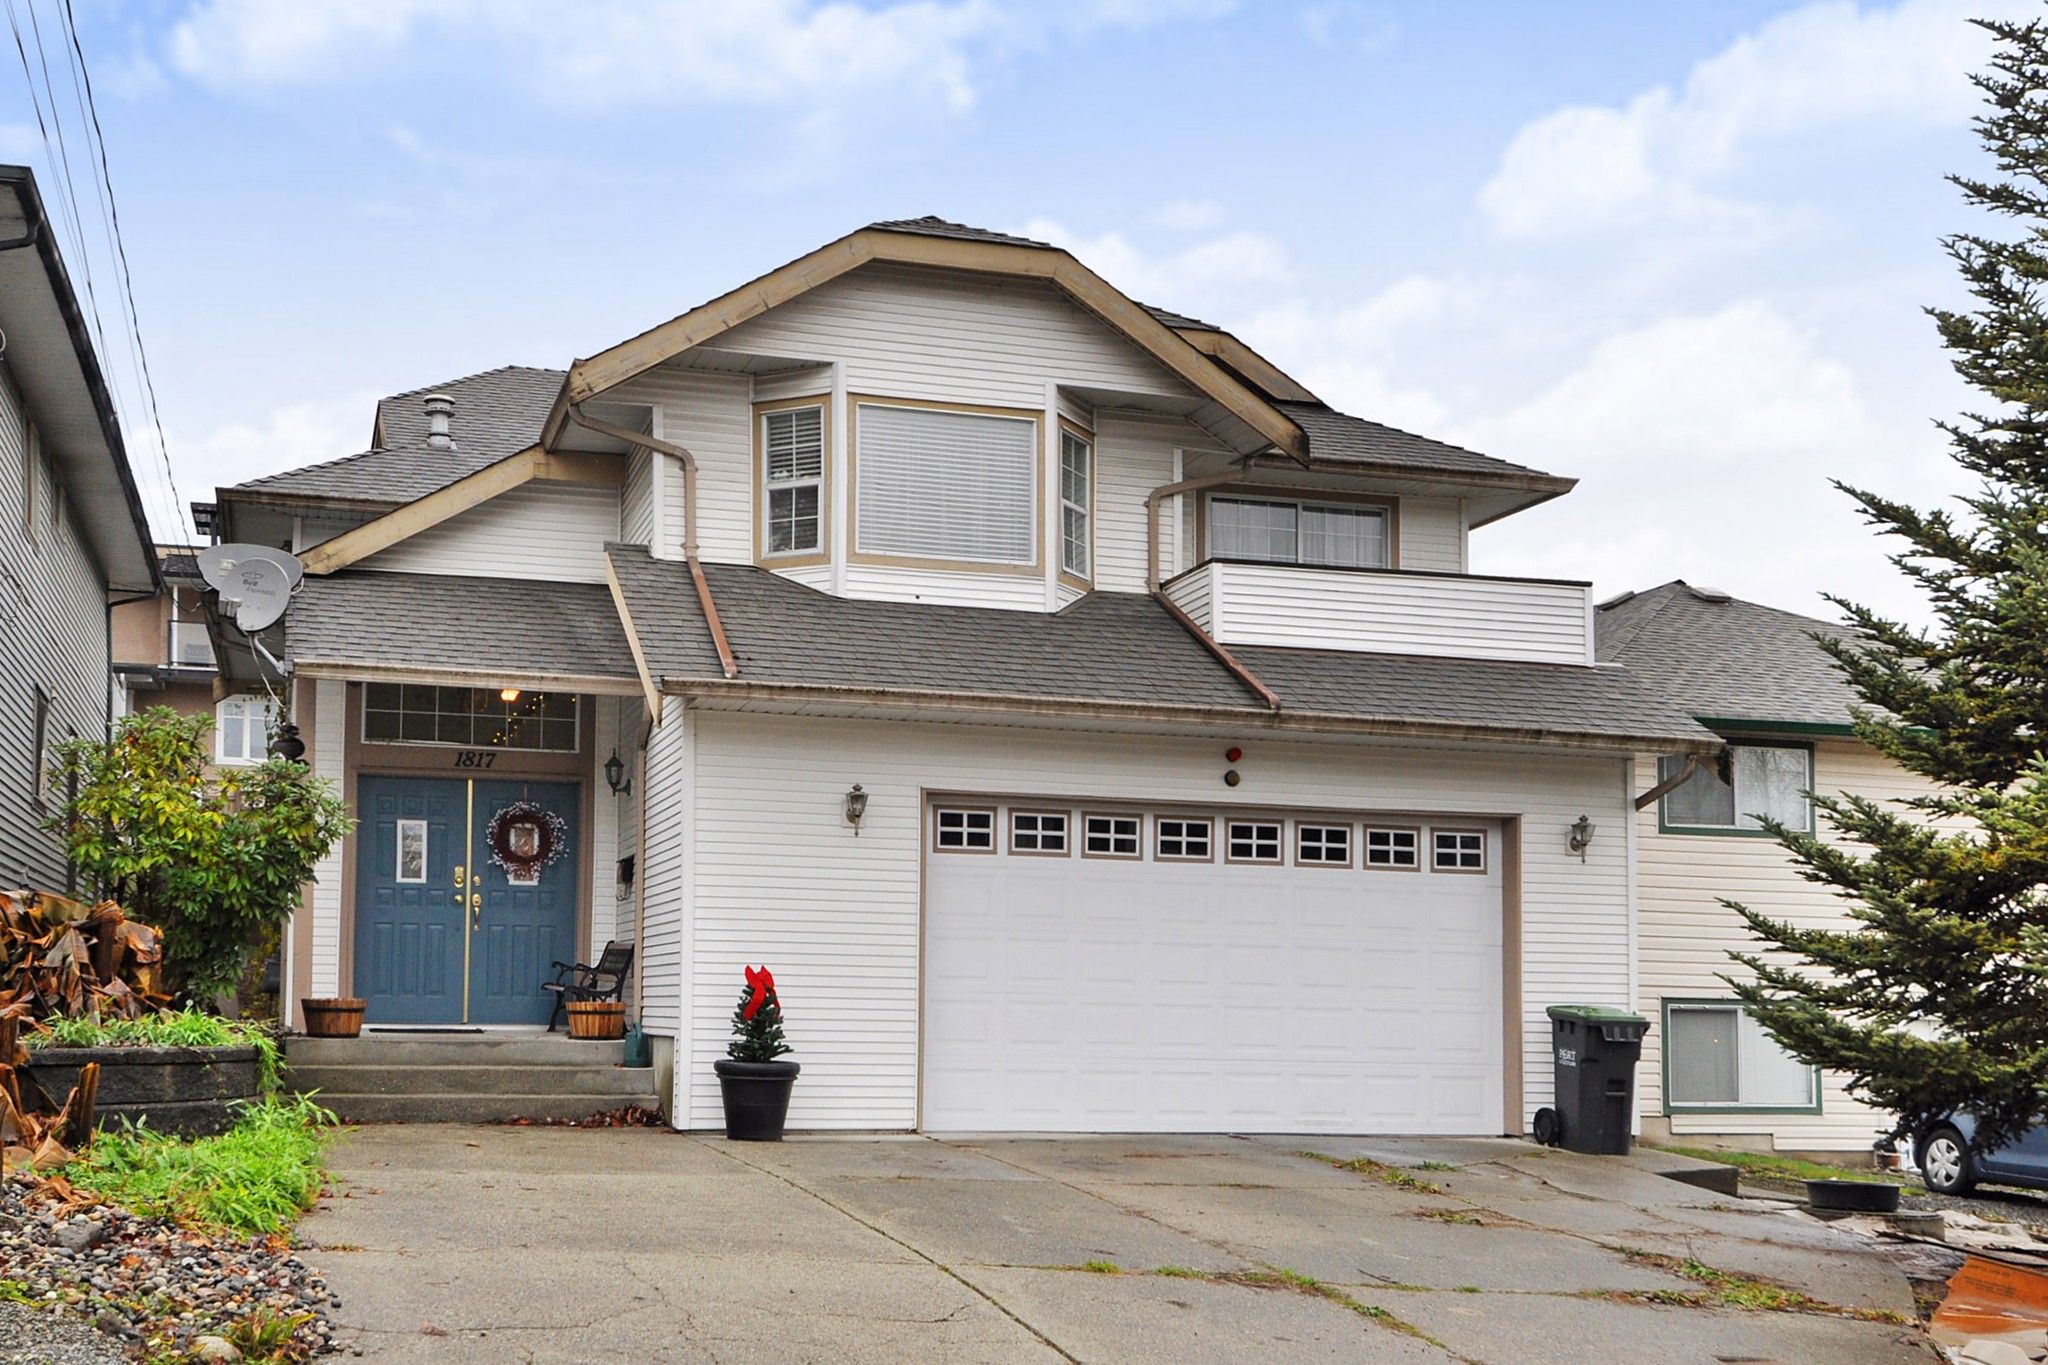 I have sold a property at 1817 HARBOUR ST in Port Coquitlam